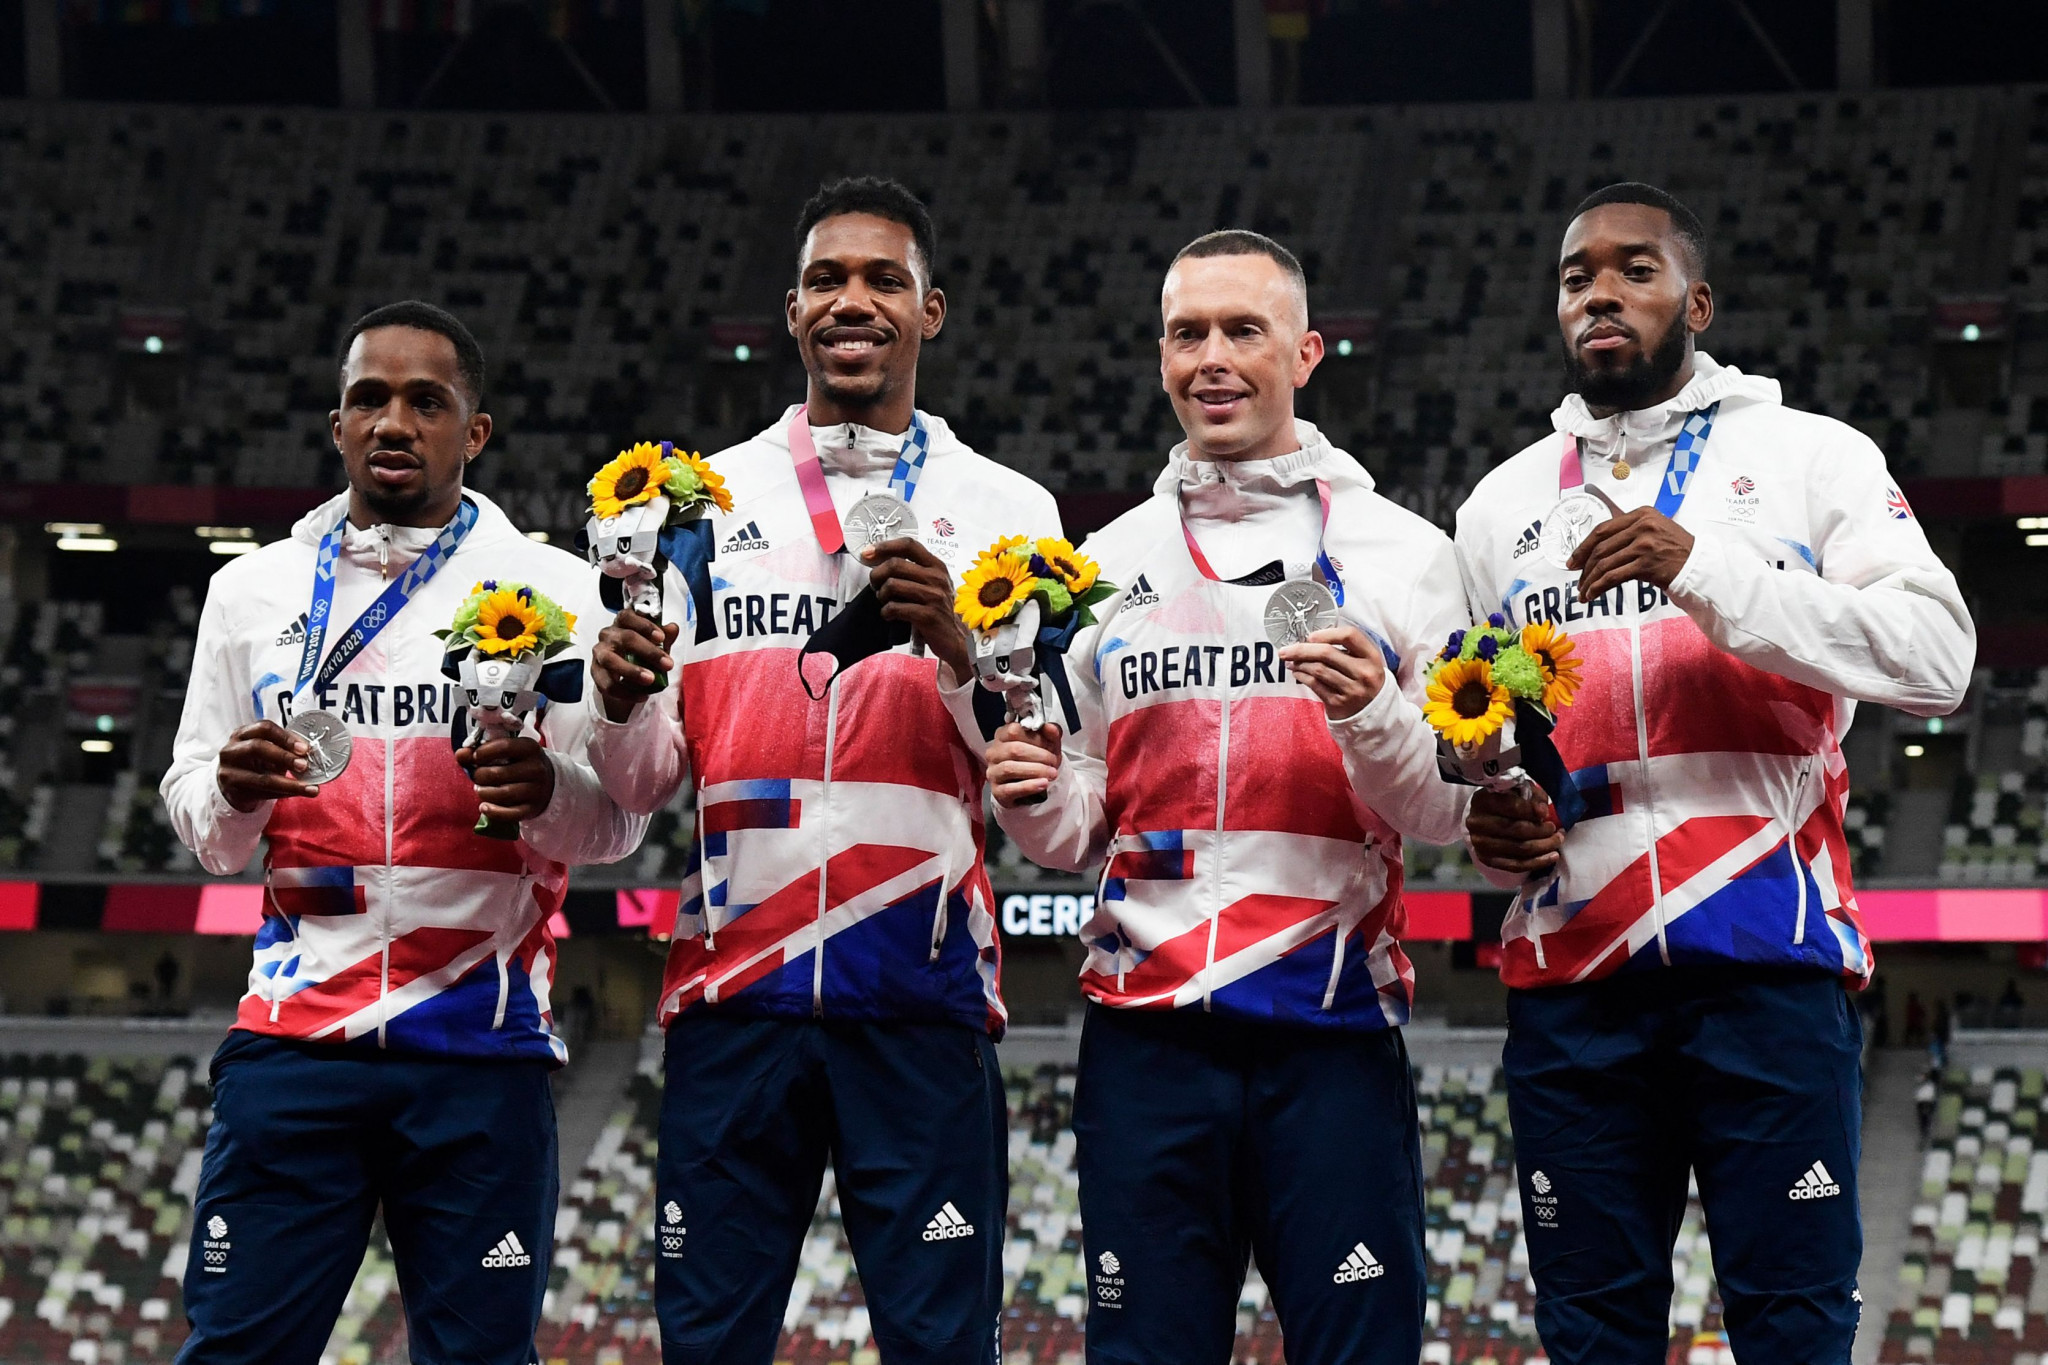 British Olympic Association formally instructed to hand back Tokyo 2020 4x100m silver medals following Ujah doping offence